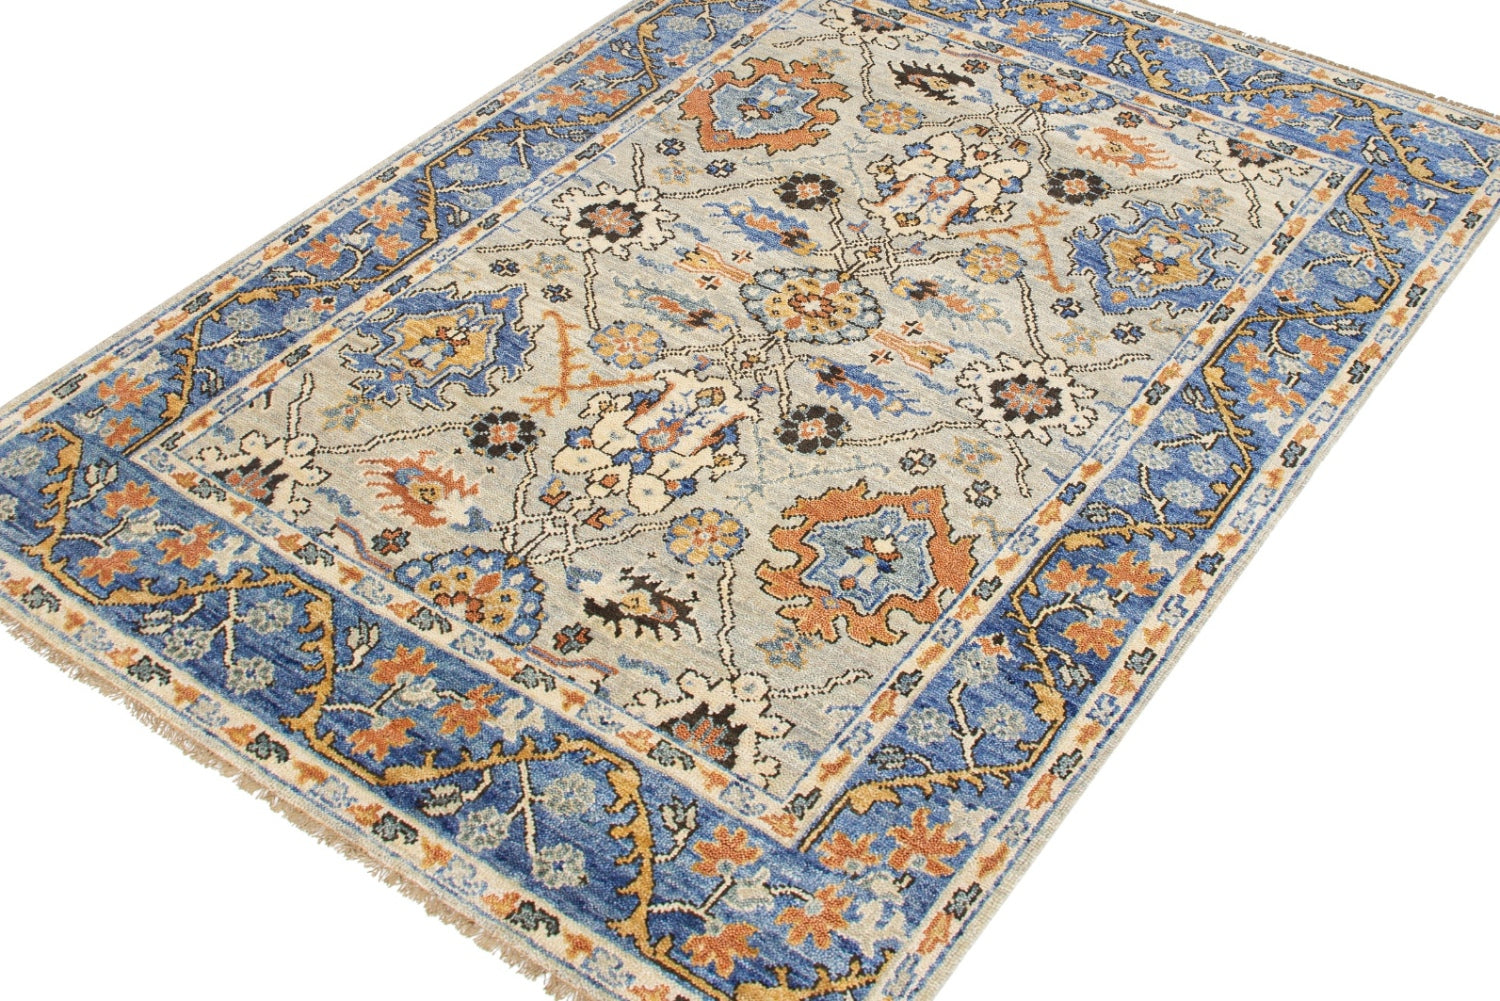 Sultanabad 2 Handwoven Traditional Rug, J71725